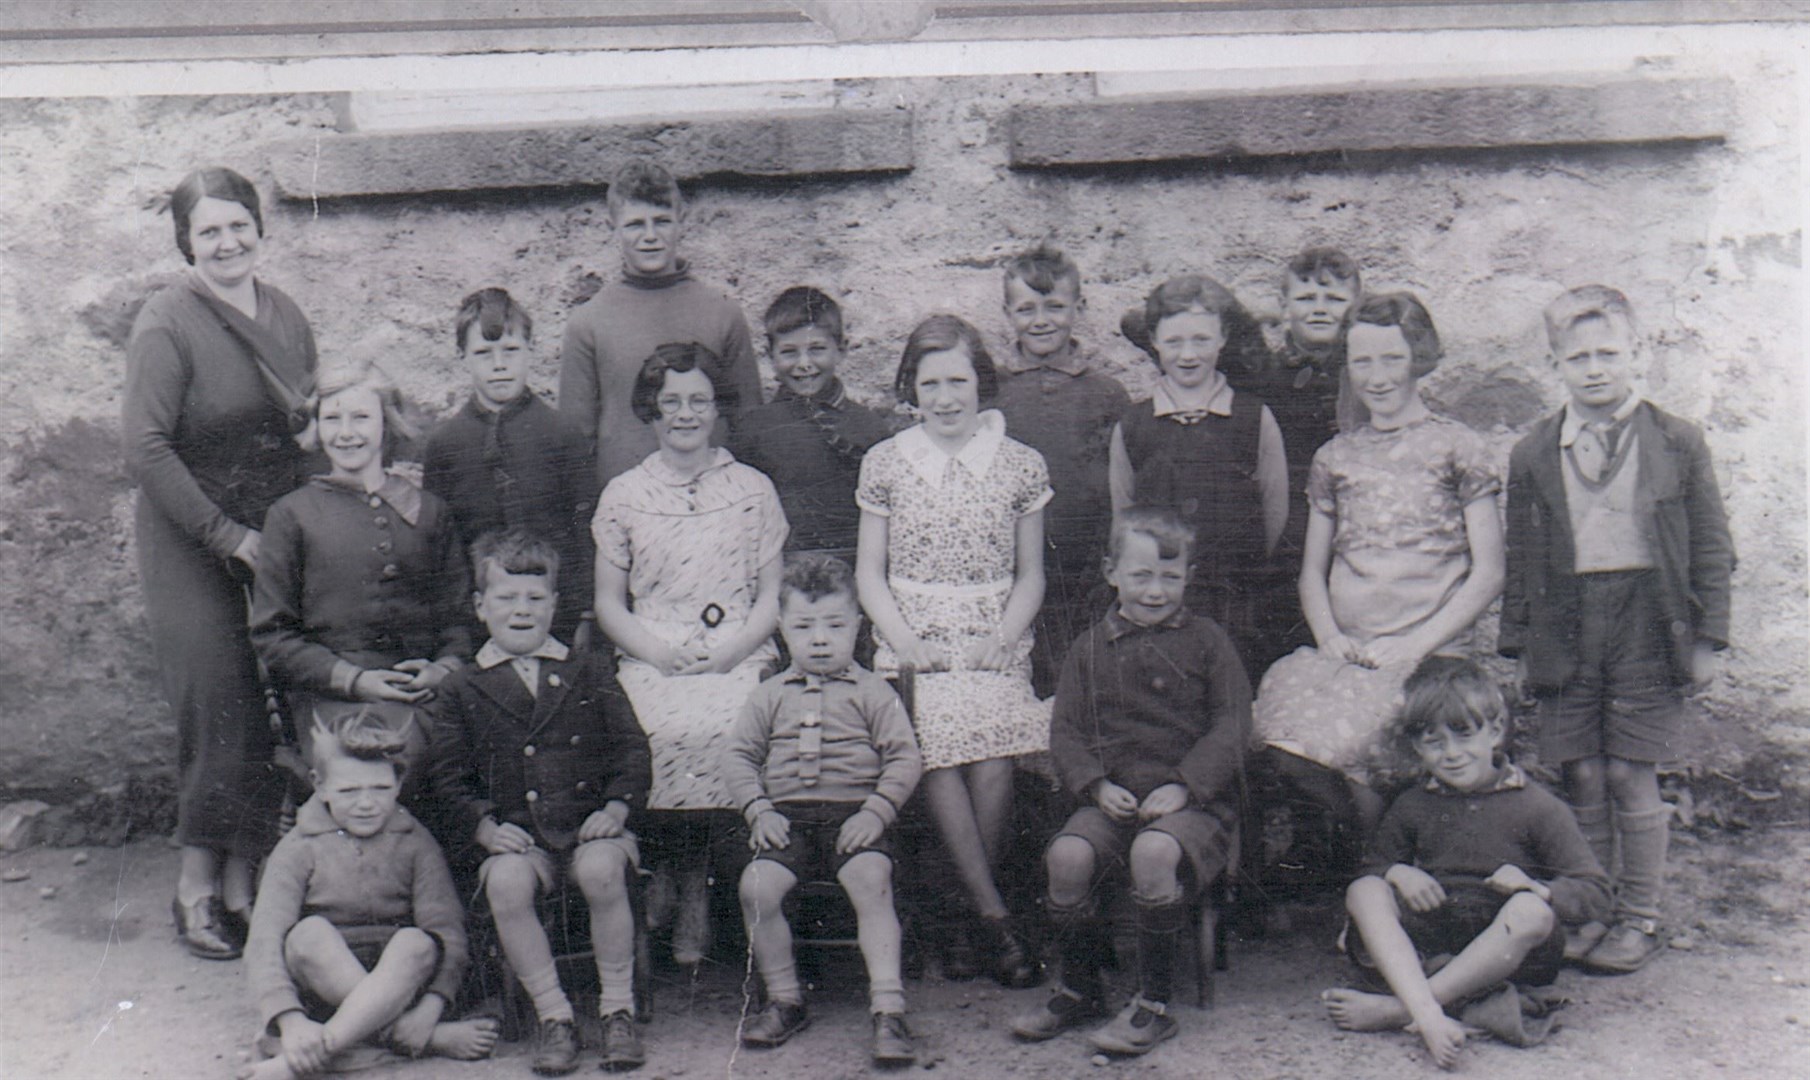 A photograph of the teacher and pupils at Laide School in 1936.Back row, l-r: Miss Munro (teacher), Angus MacKenzie, Willie MacAulay, Alistair MacKenzie, Hughie MacKenzie, Allan MacAulay, Bertie MacLennan. Middle row, l-r: Ina MacKenzie, Kathy Campbell, Katie MacKenzie, Peggy MacLean, Nina MacKenzie. Front row, l-r: Charlie MacKenzie, Don and William MacKenzie (brothers of Alistair), Donald MacLean, Kenny MacKenzie. Miss Munro was one of the individuals from the area who features in the recordings.